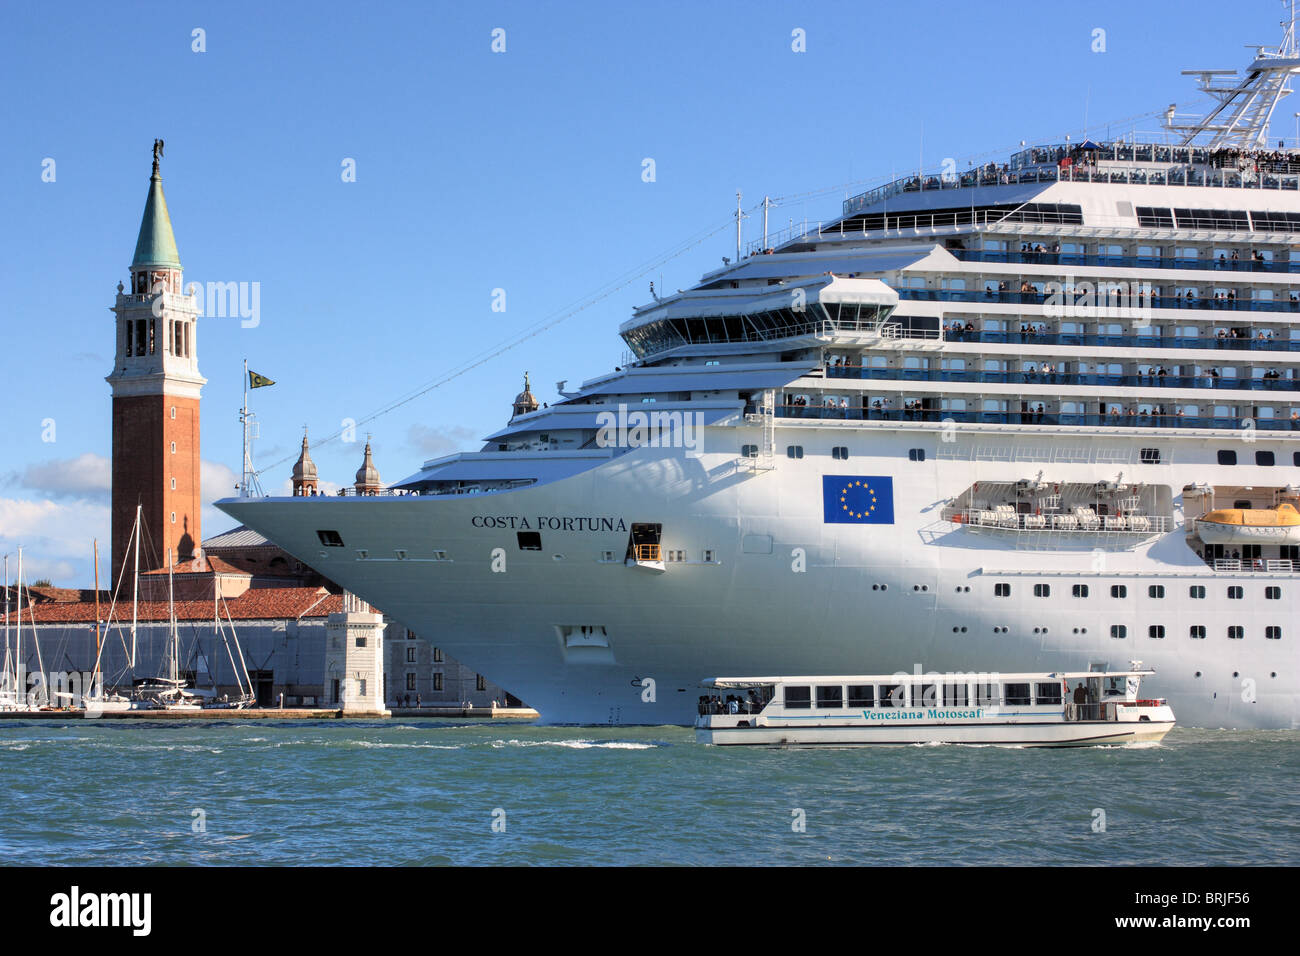 Free Images : ship, crowd, plaza, bazaar, market, marketplace, cruise, hdr,  costa, sns, fortuna, lobby, retail, shopping mall 3971x2233 - - 150742 -  Free stock photos - PxHere